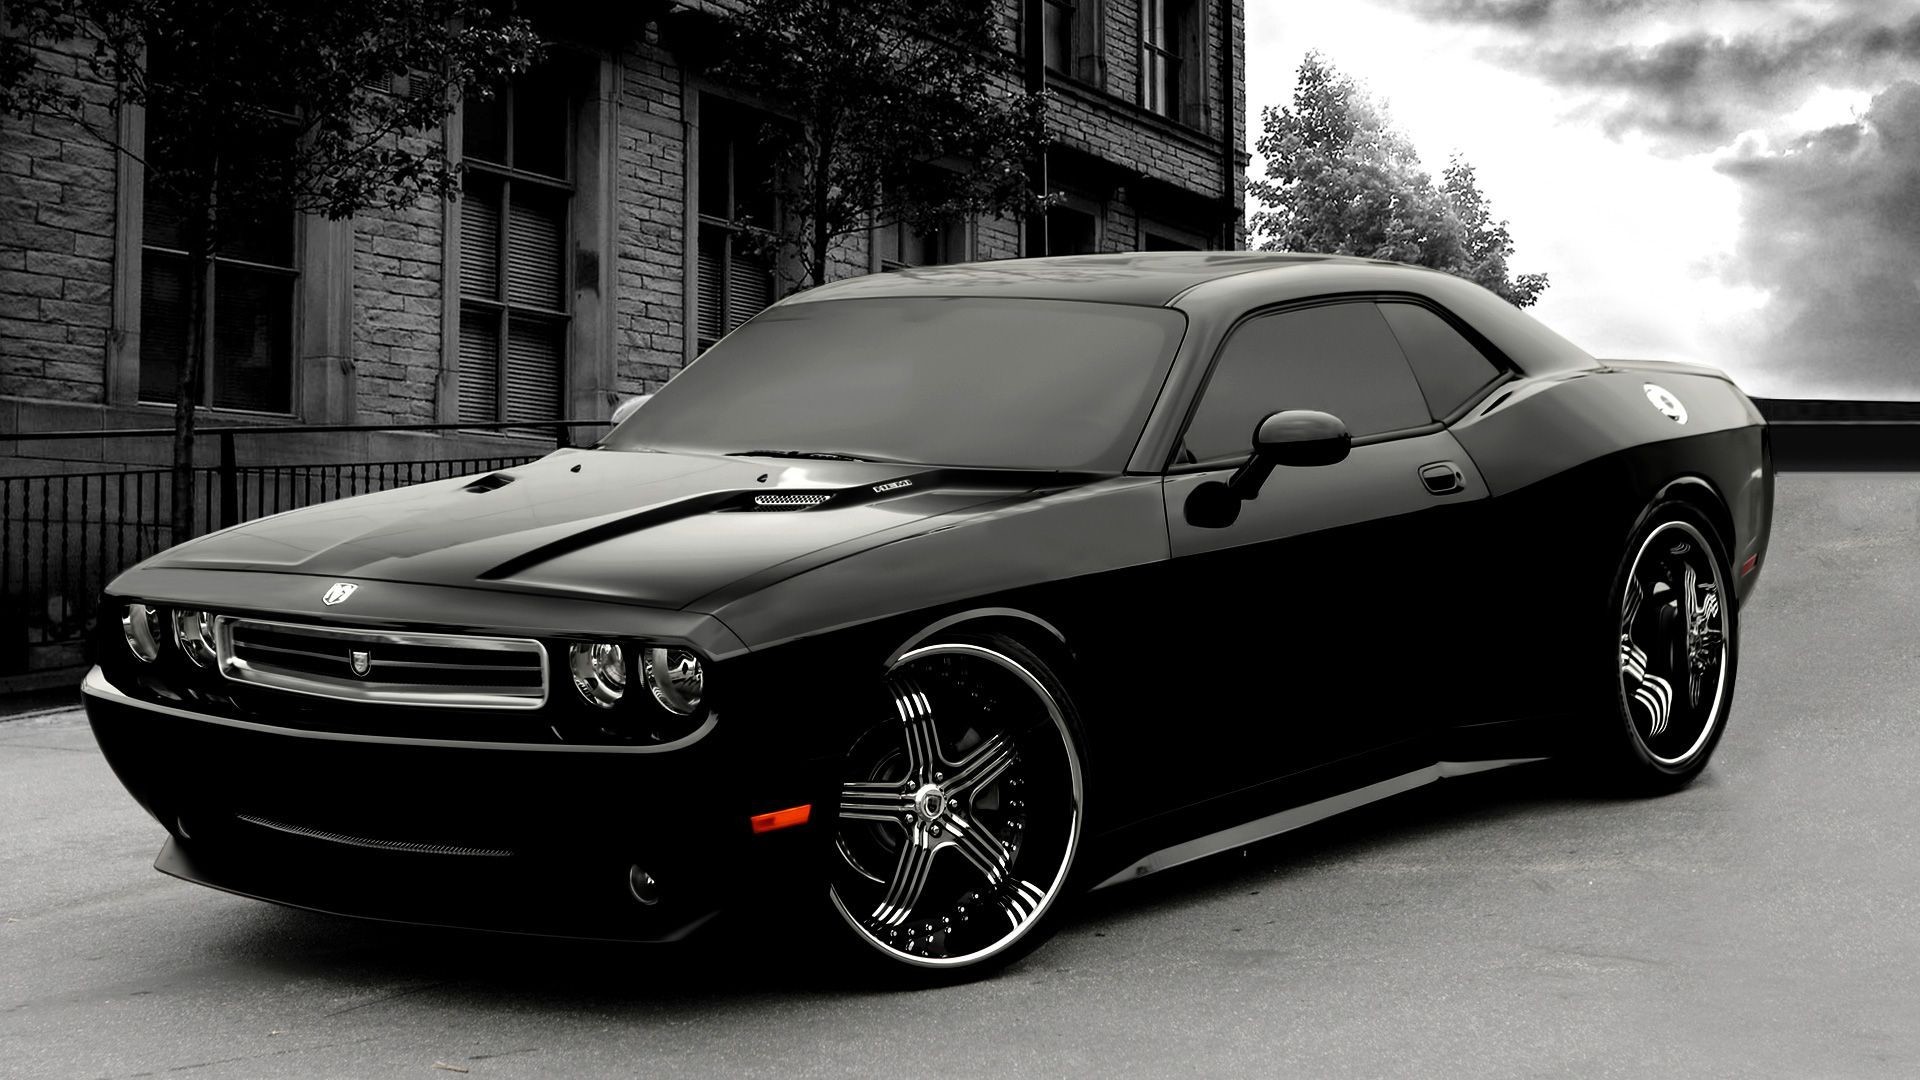 1920x1080 Dodge Car Wallpapers Page HD Car Wallpapers 1600Ã1200 Dodge Challenger  Backgrounds (40 Wallpapers